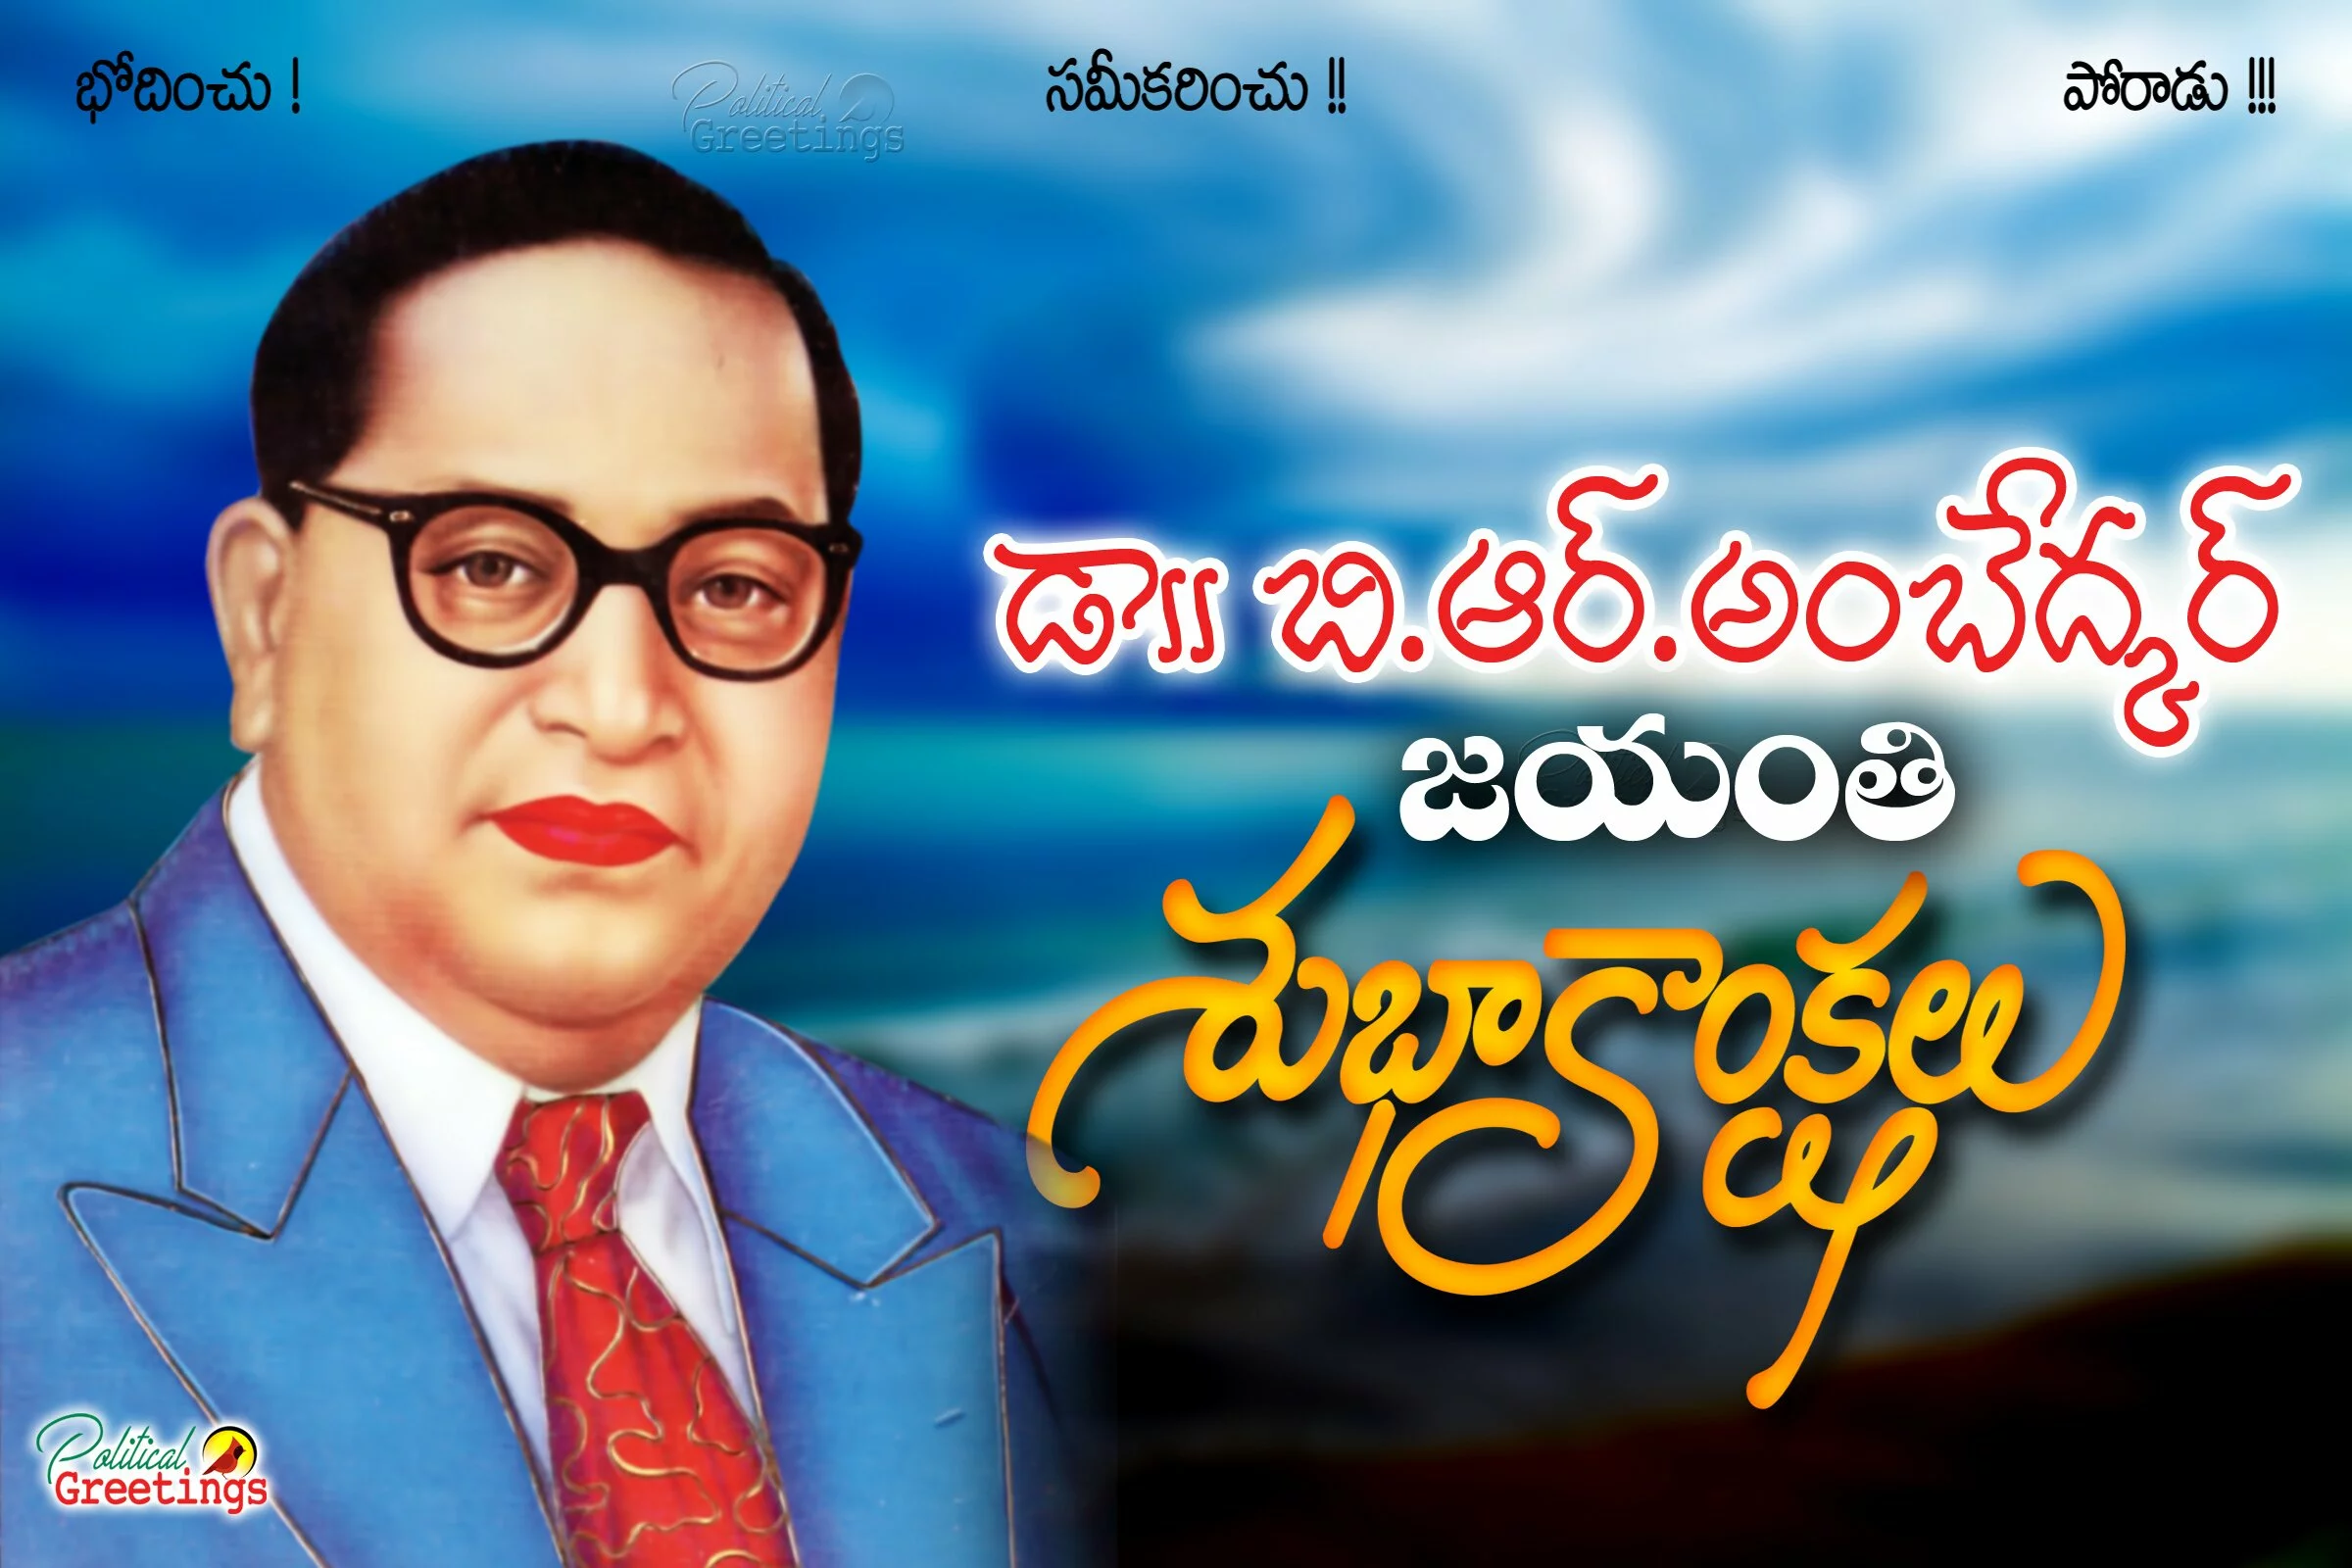 Ambedkar jayanti wishes messages SMS quotes images in Telugu2